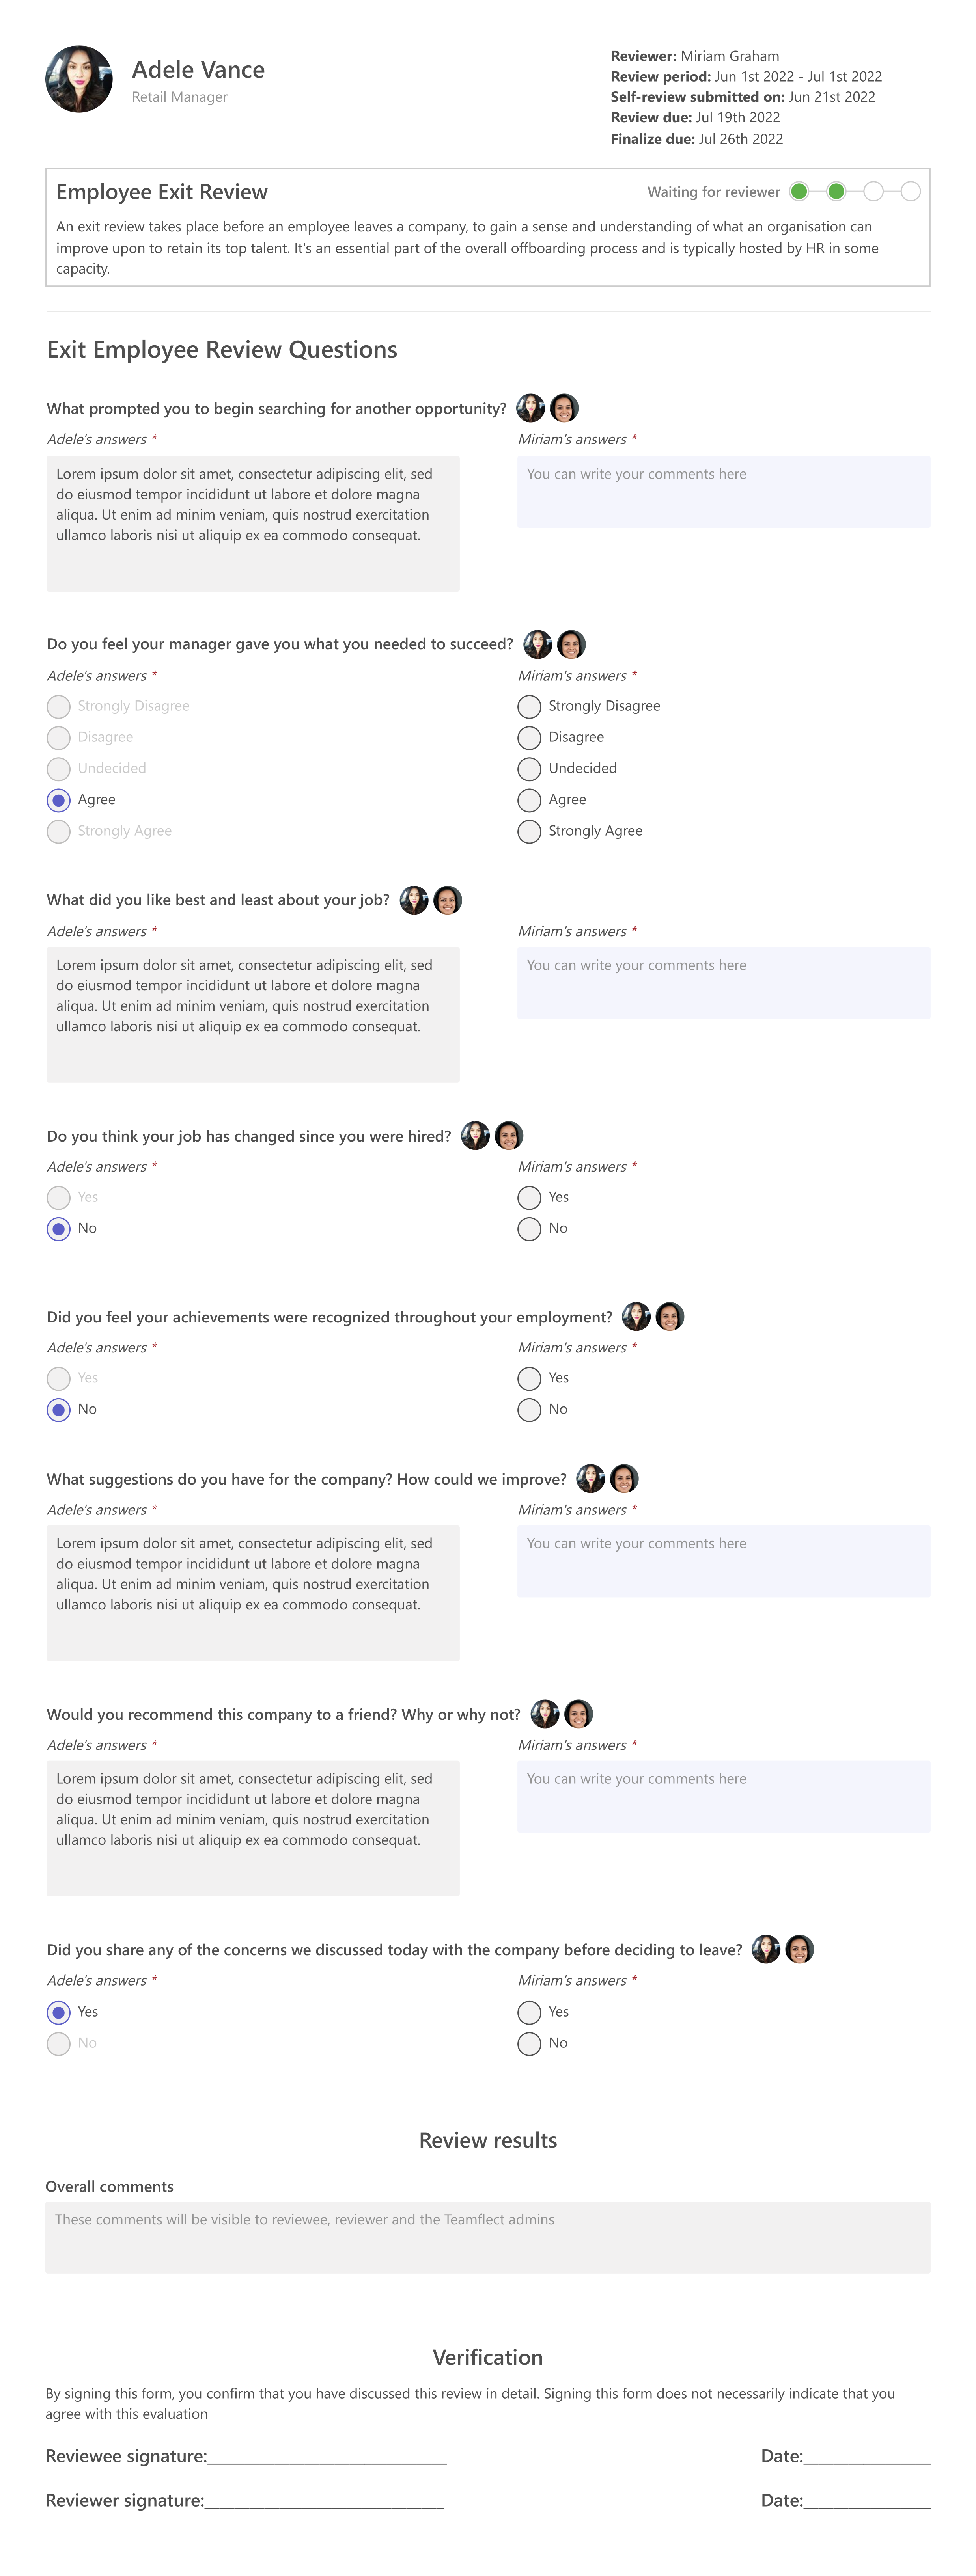 Teamflect employee exit review template in Microsoft Teams